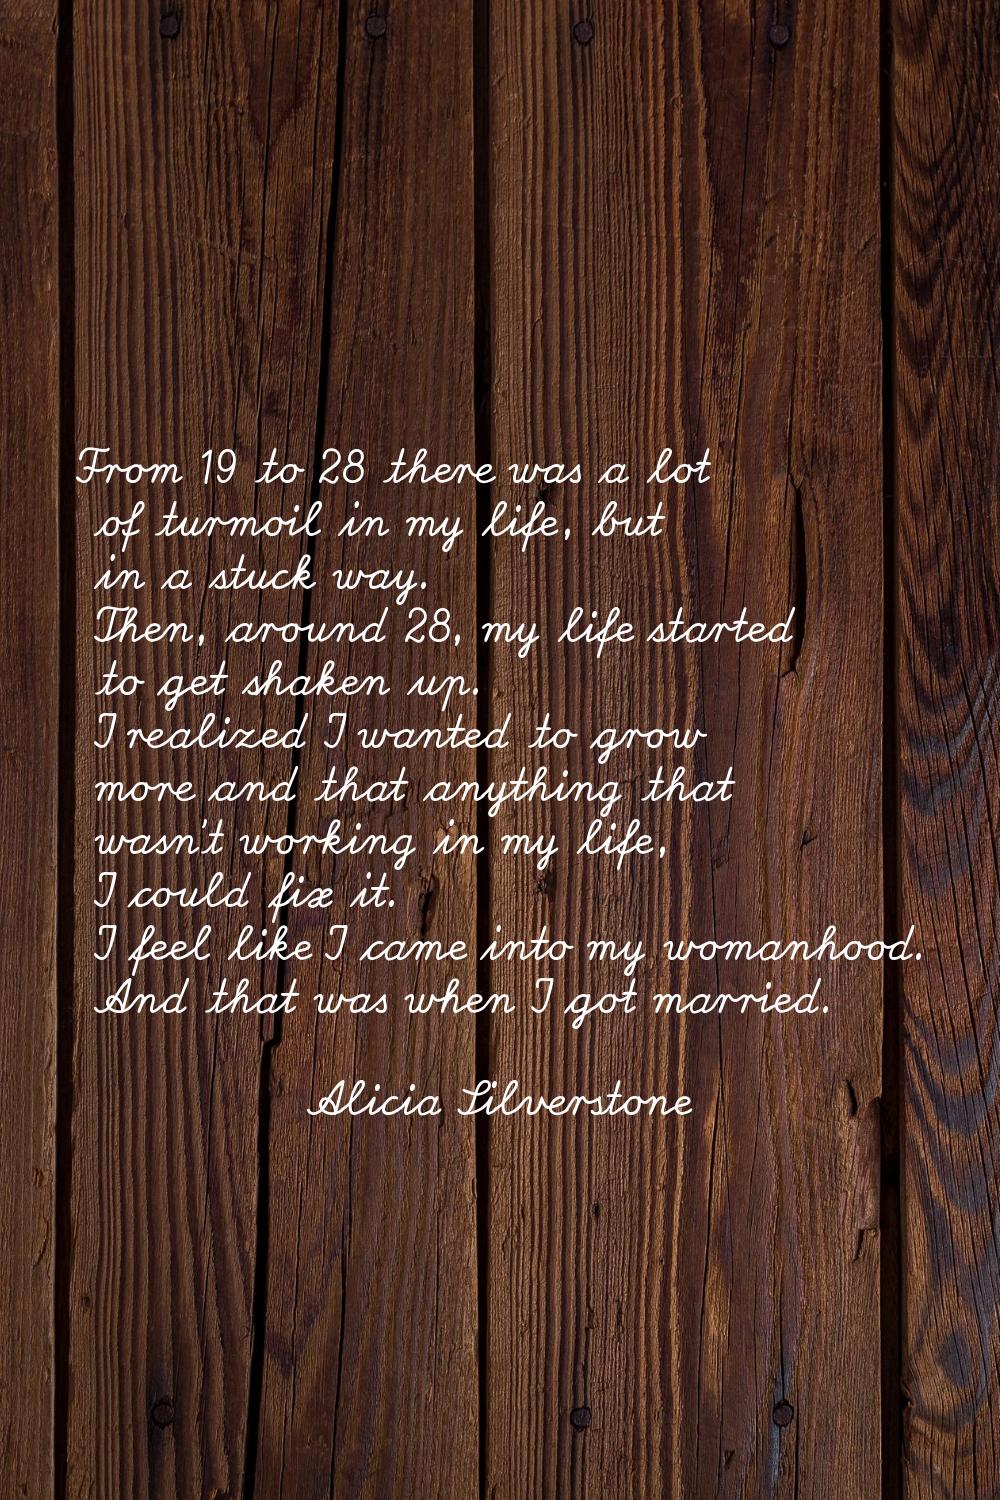 From 19 to 28 there was a lot of turmoil in my life, but in a stuck way. Then, around 28, my life s